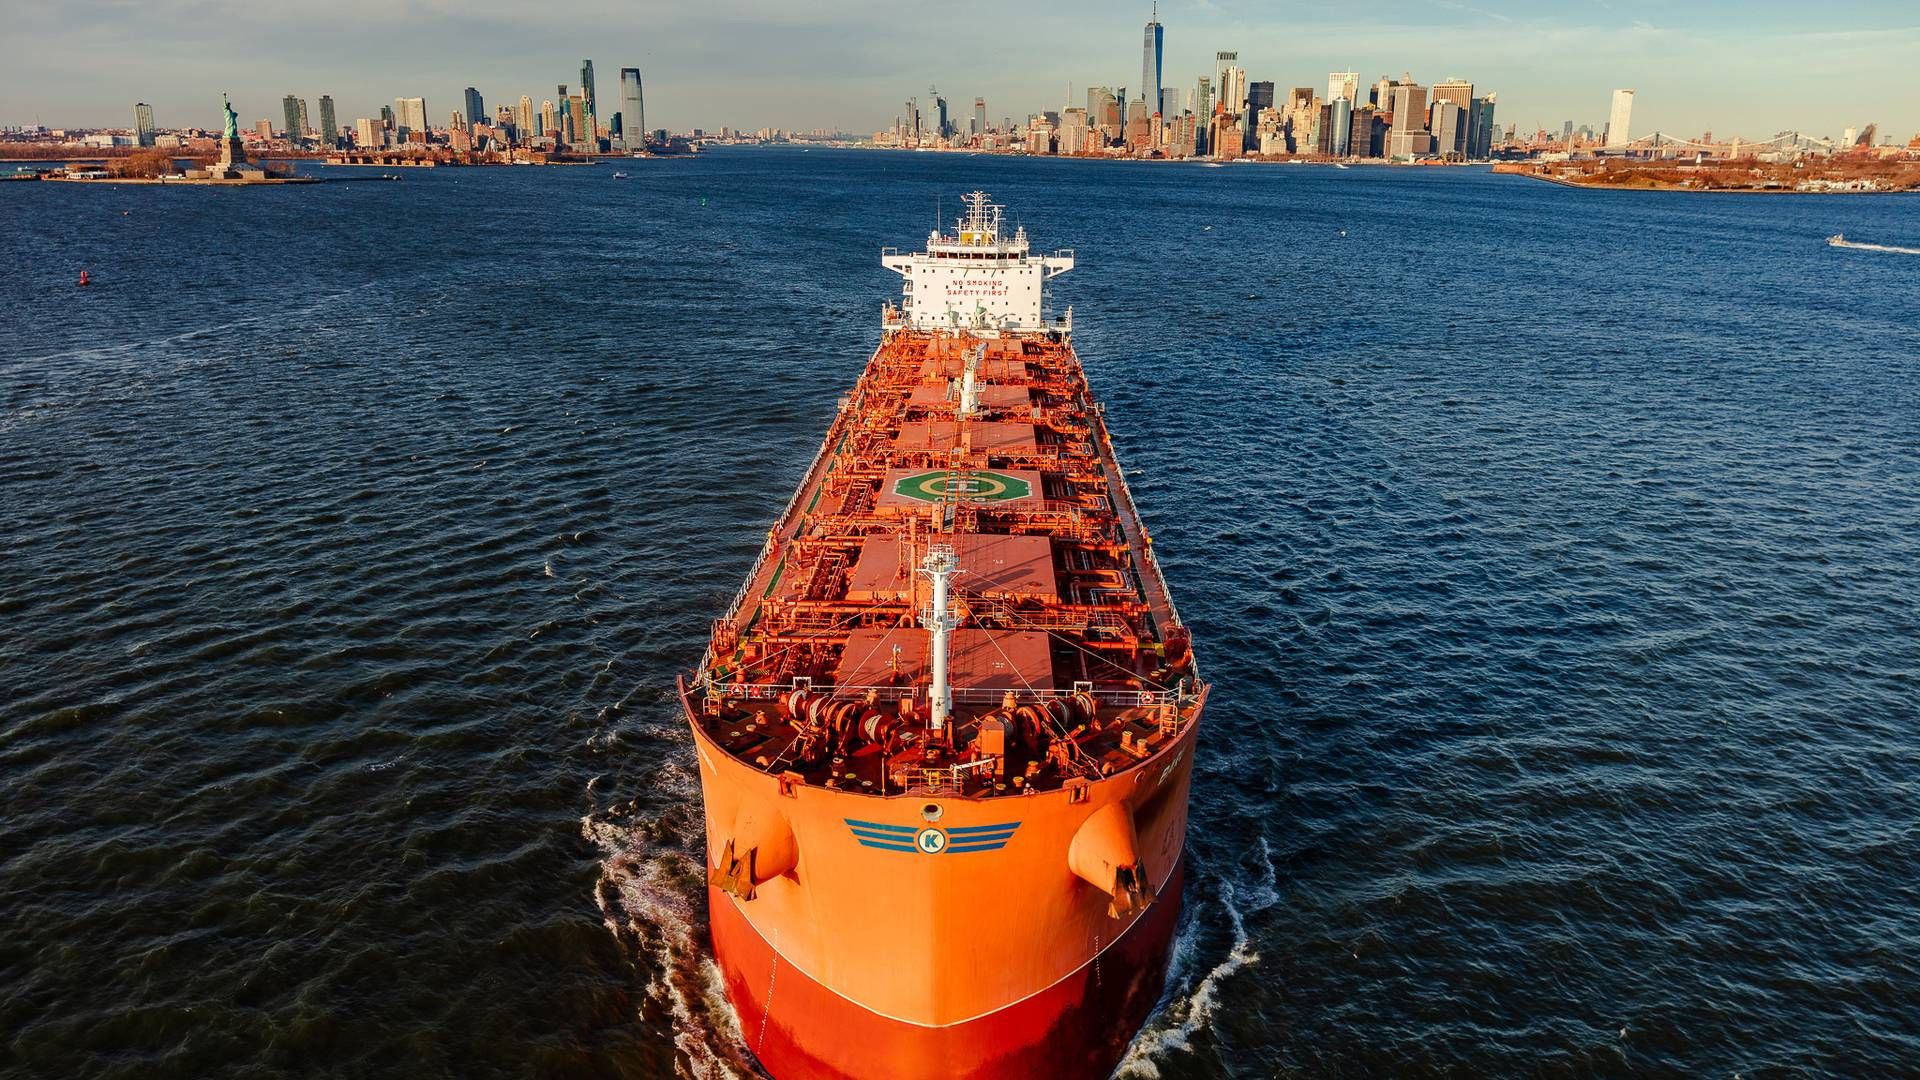 Klaveness Combination Carriers operates in both the tanker and bulk market. | Photo: Klaveness Combination Carriers